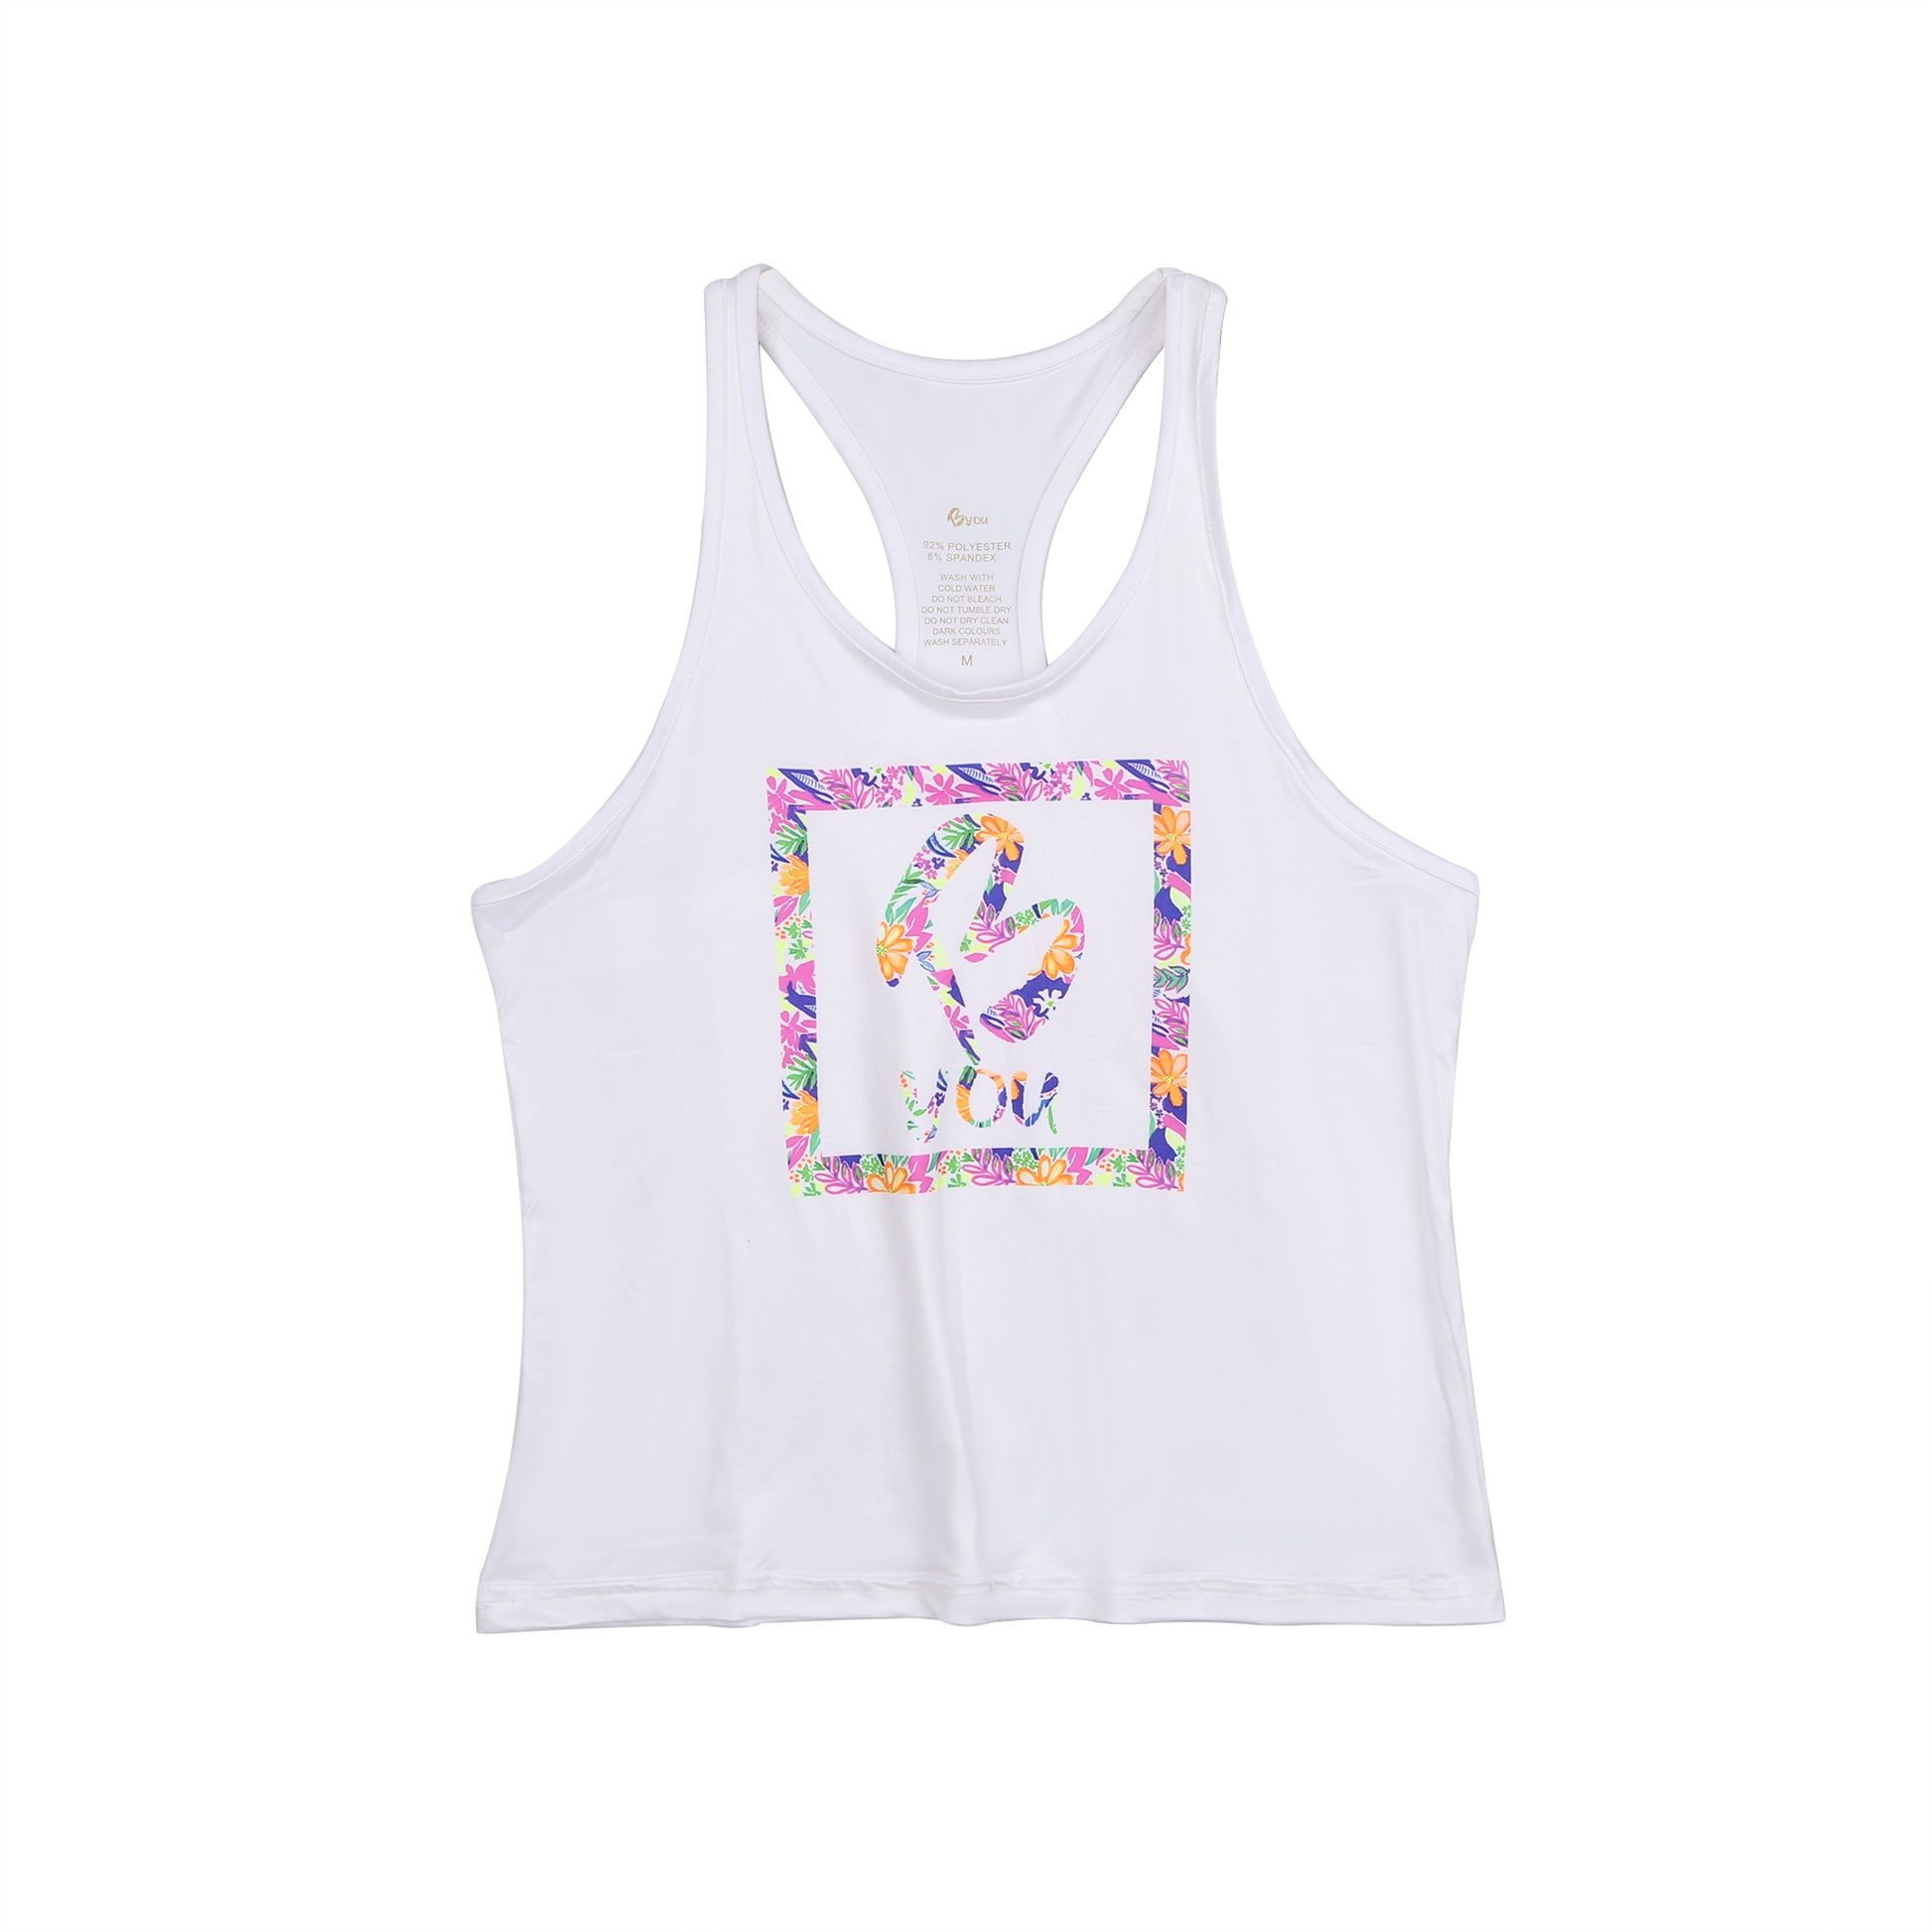 Singlet Top or Tank Top for Girls. Tropical Print with B you Logo on a White Background. Activewear for Girls, Gymnastics wear, girls clothing, leotards. Girls Sports Clothing. B you Active, B you leotards, B you Swimwear.